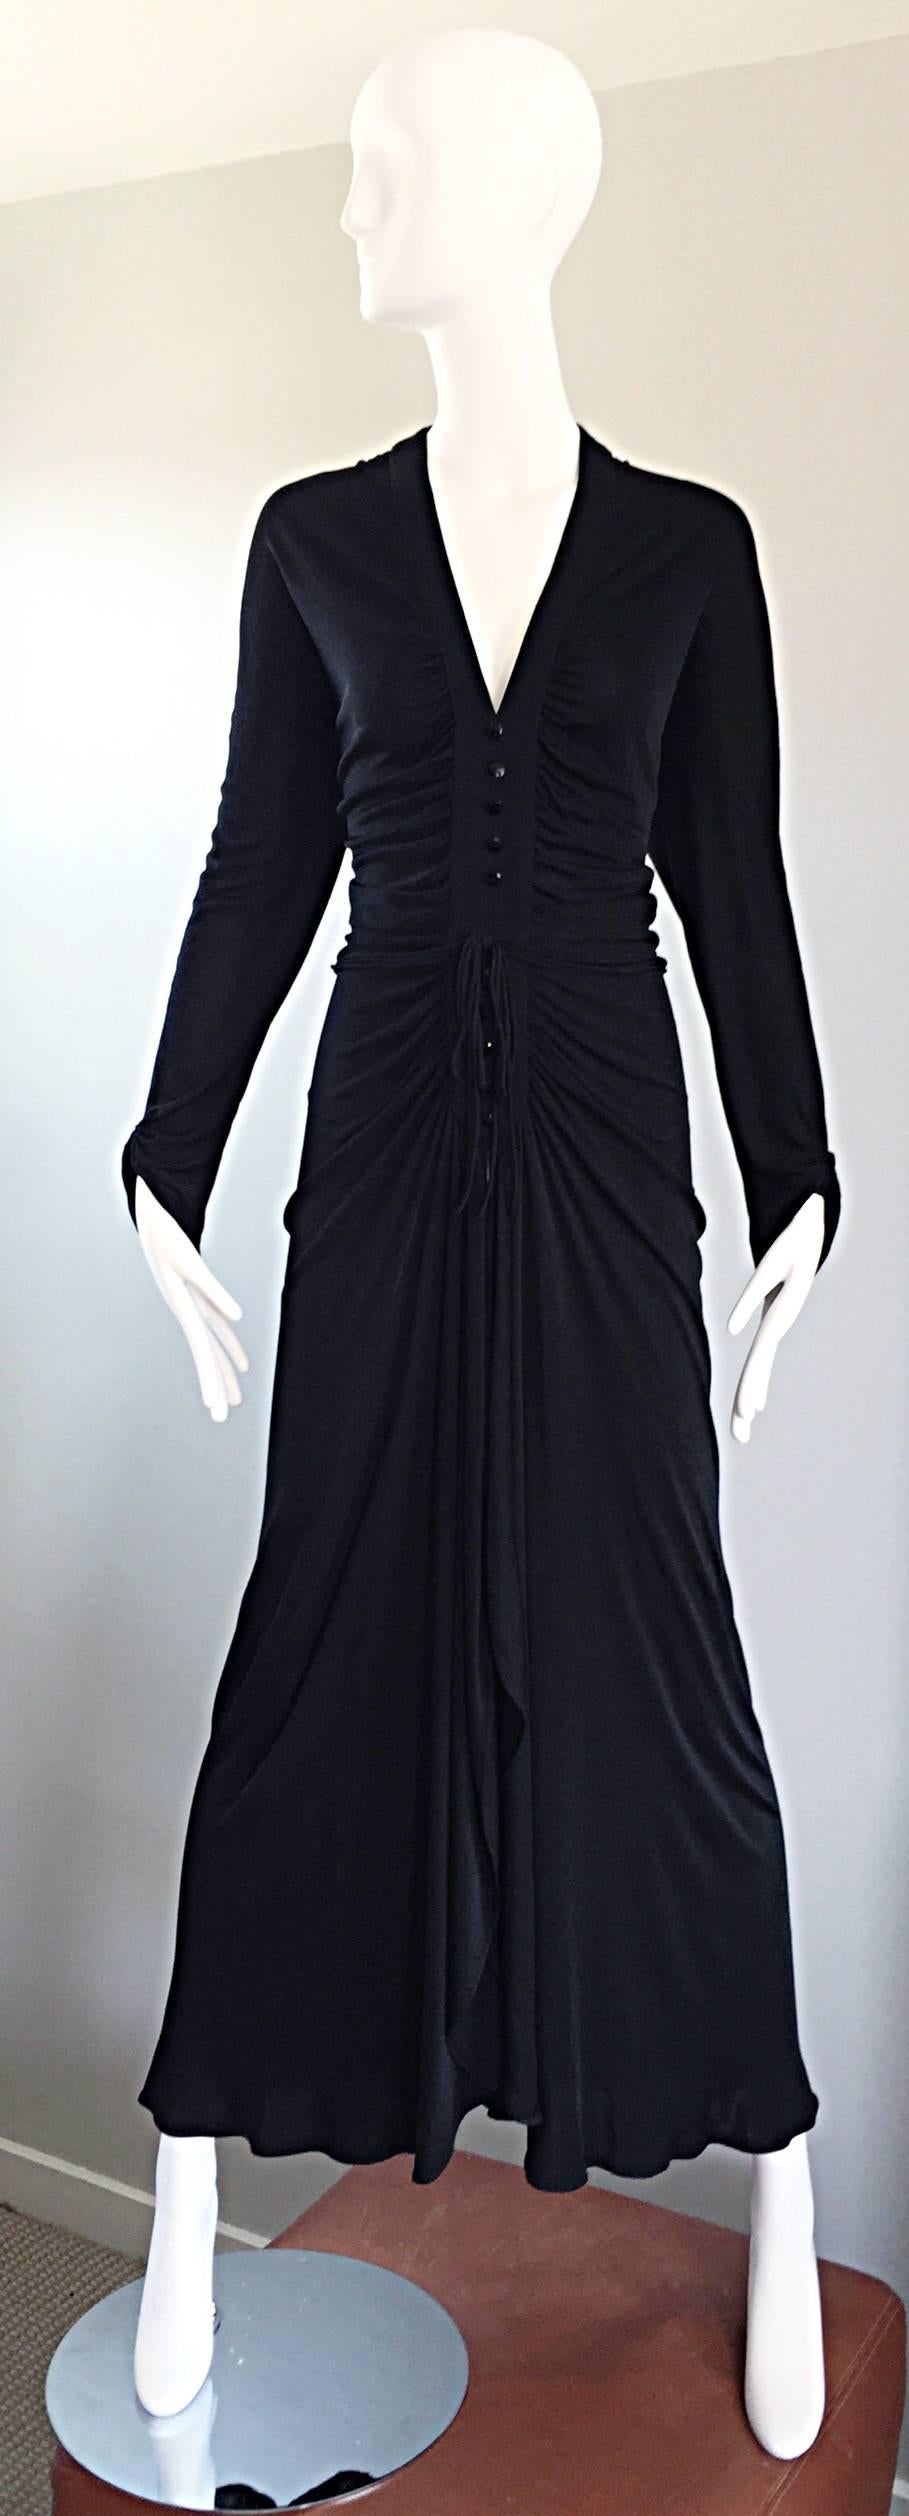 Sensation vintage 70s NINA RICCI black jersey long sleeve belted full length evening dress! Words cannot even begin to describe how utterly beautiful this gown is, and how flattering it is on the body! Demi Couture, with a significant amount of